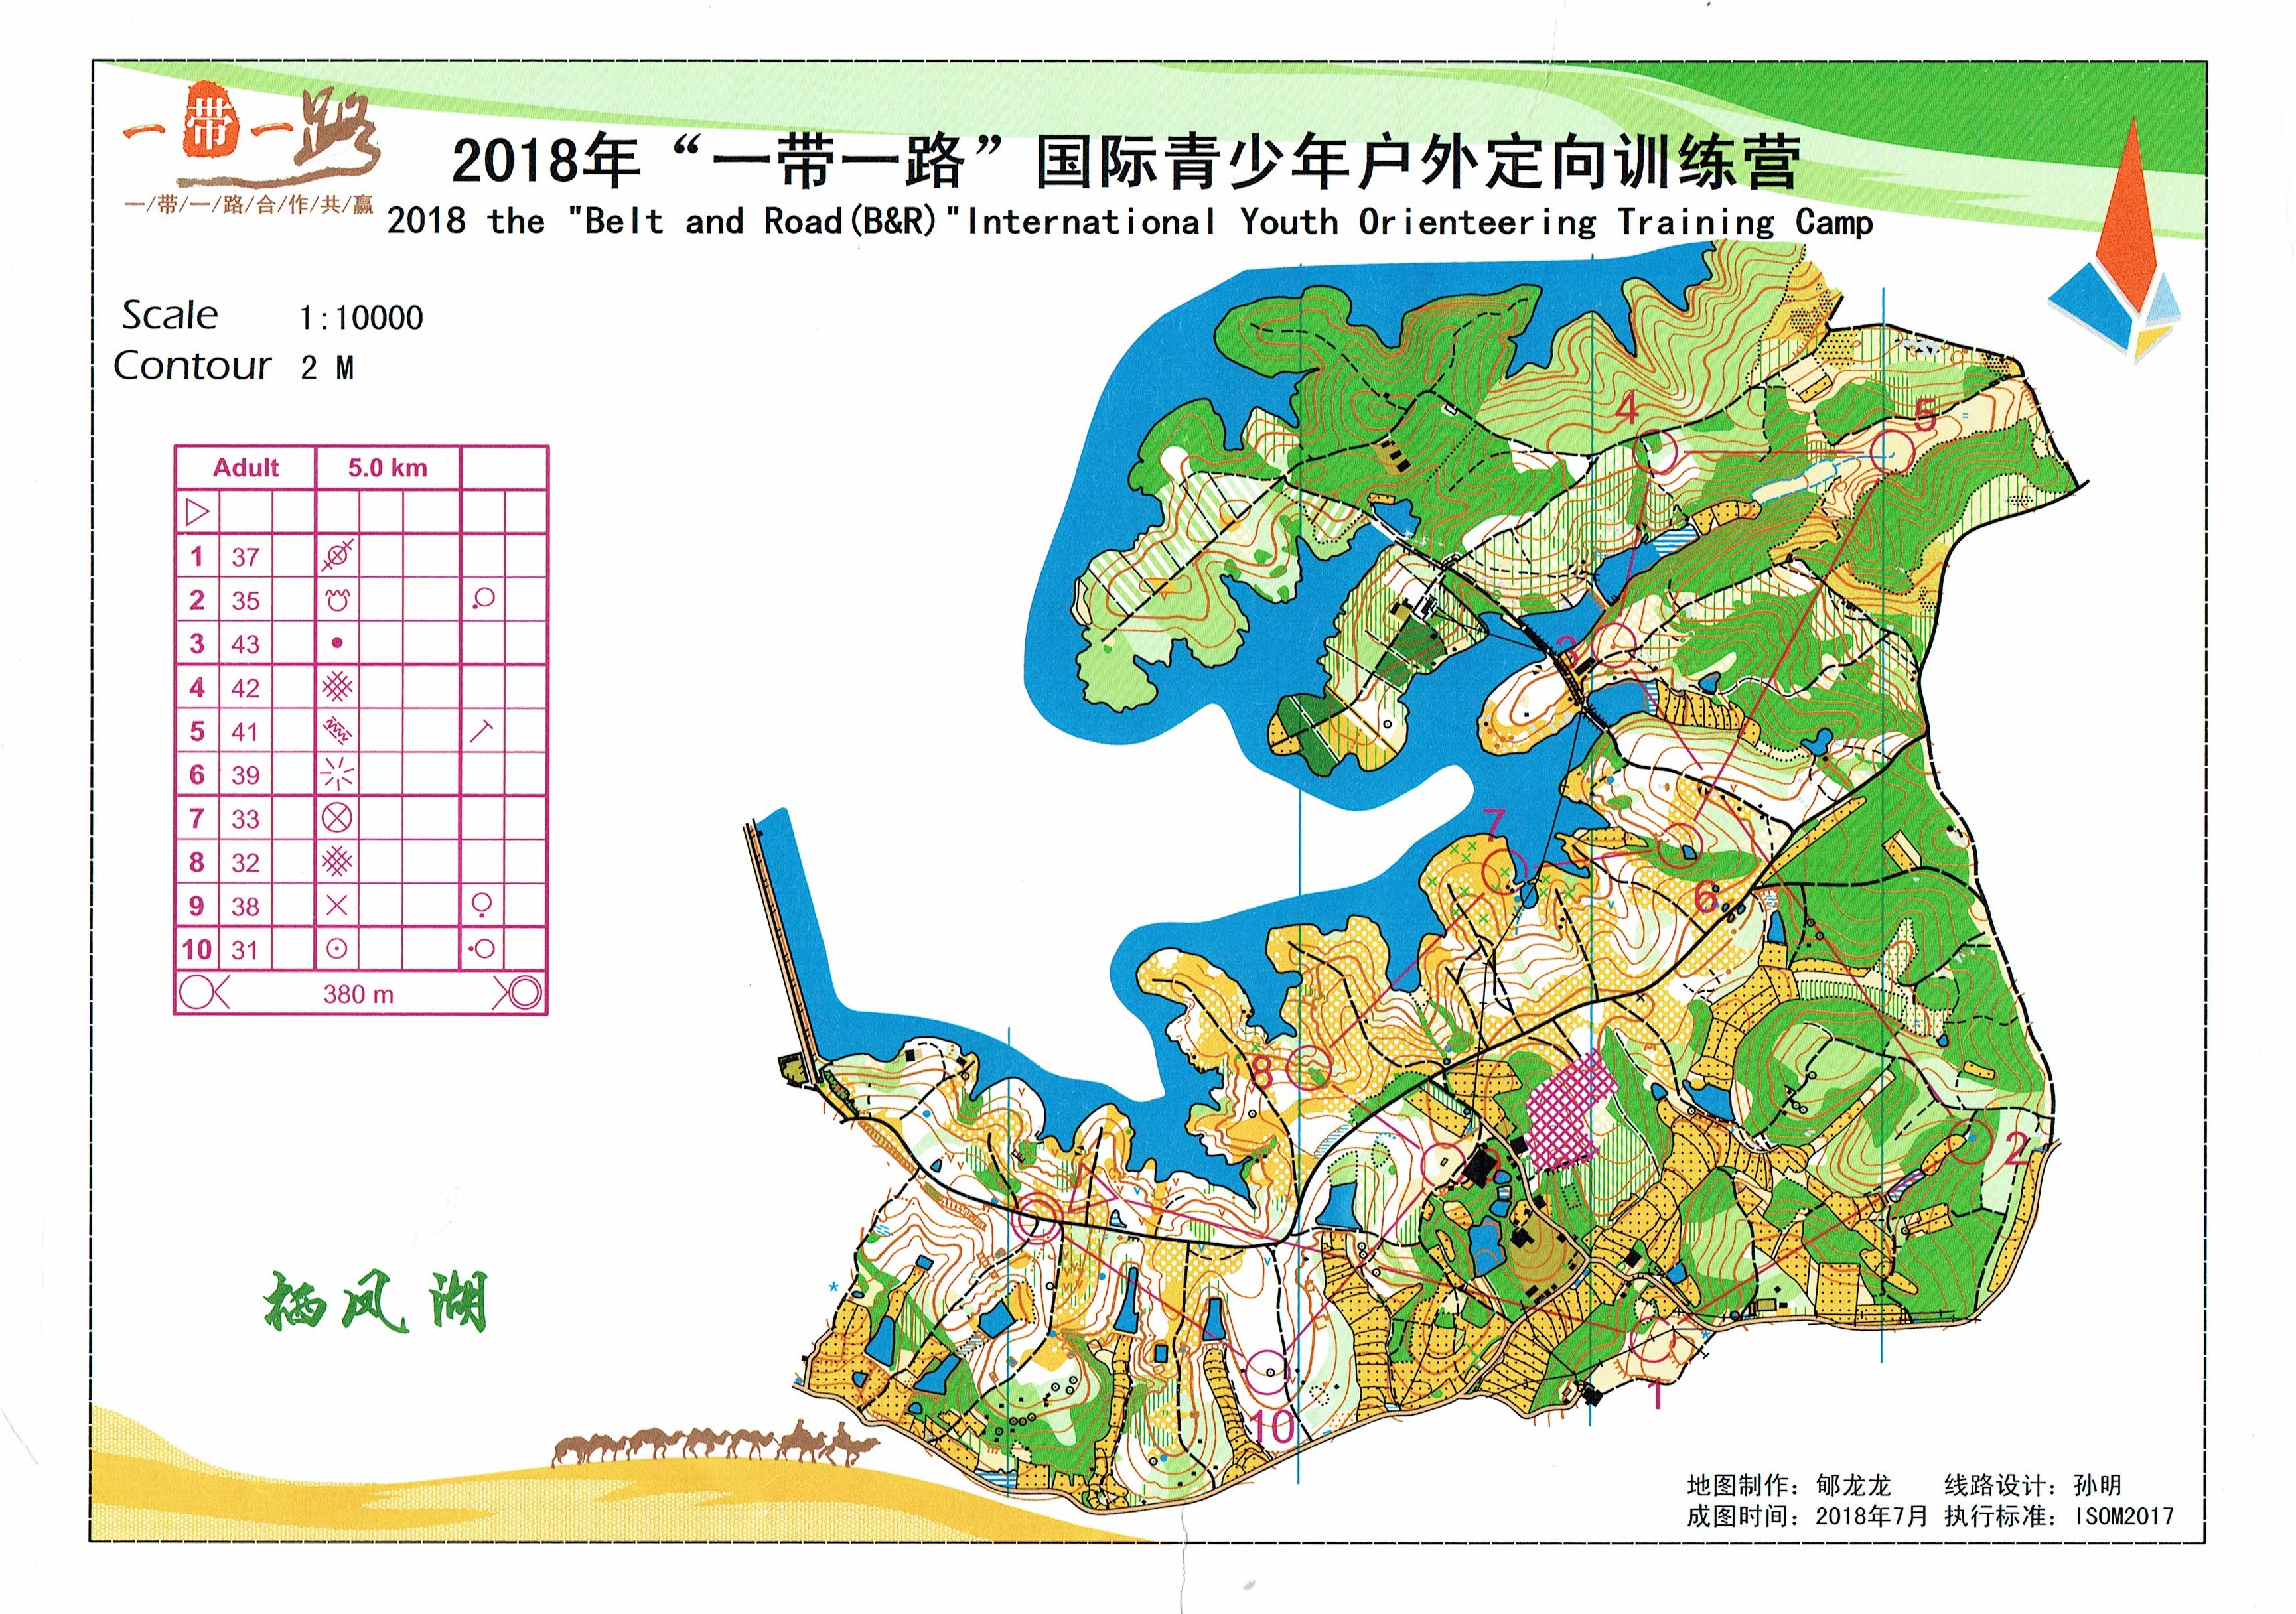 Belt and Road International Youth Orienteering Camp (2018-10-26)